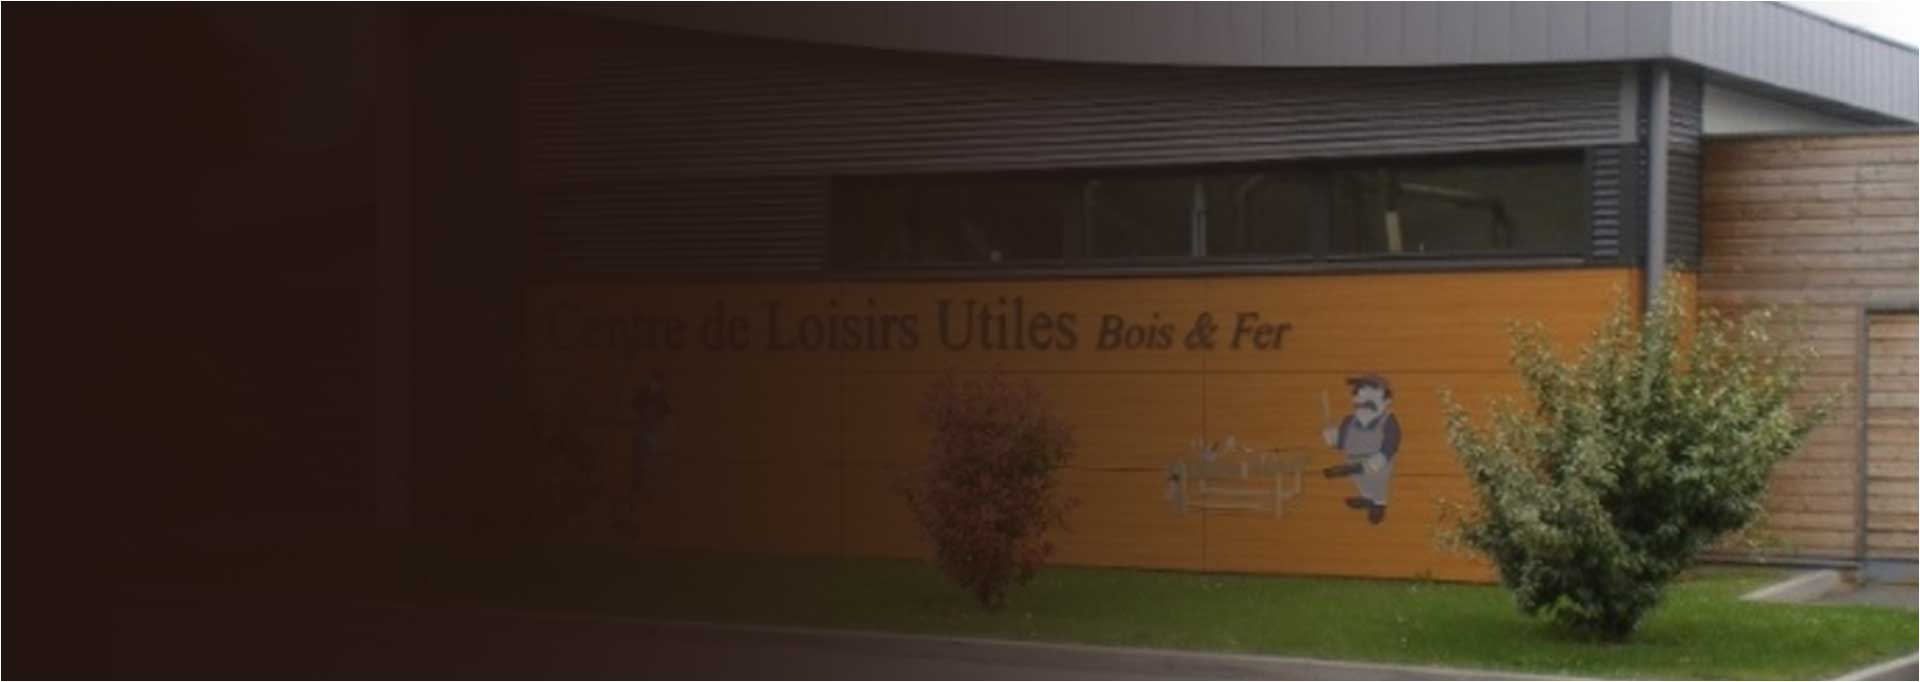 https://www.loisirs-bois-et-fer.fr/wp-content/themes/woodex-child/images/logo-small.png